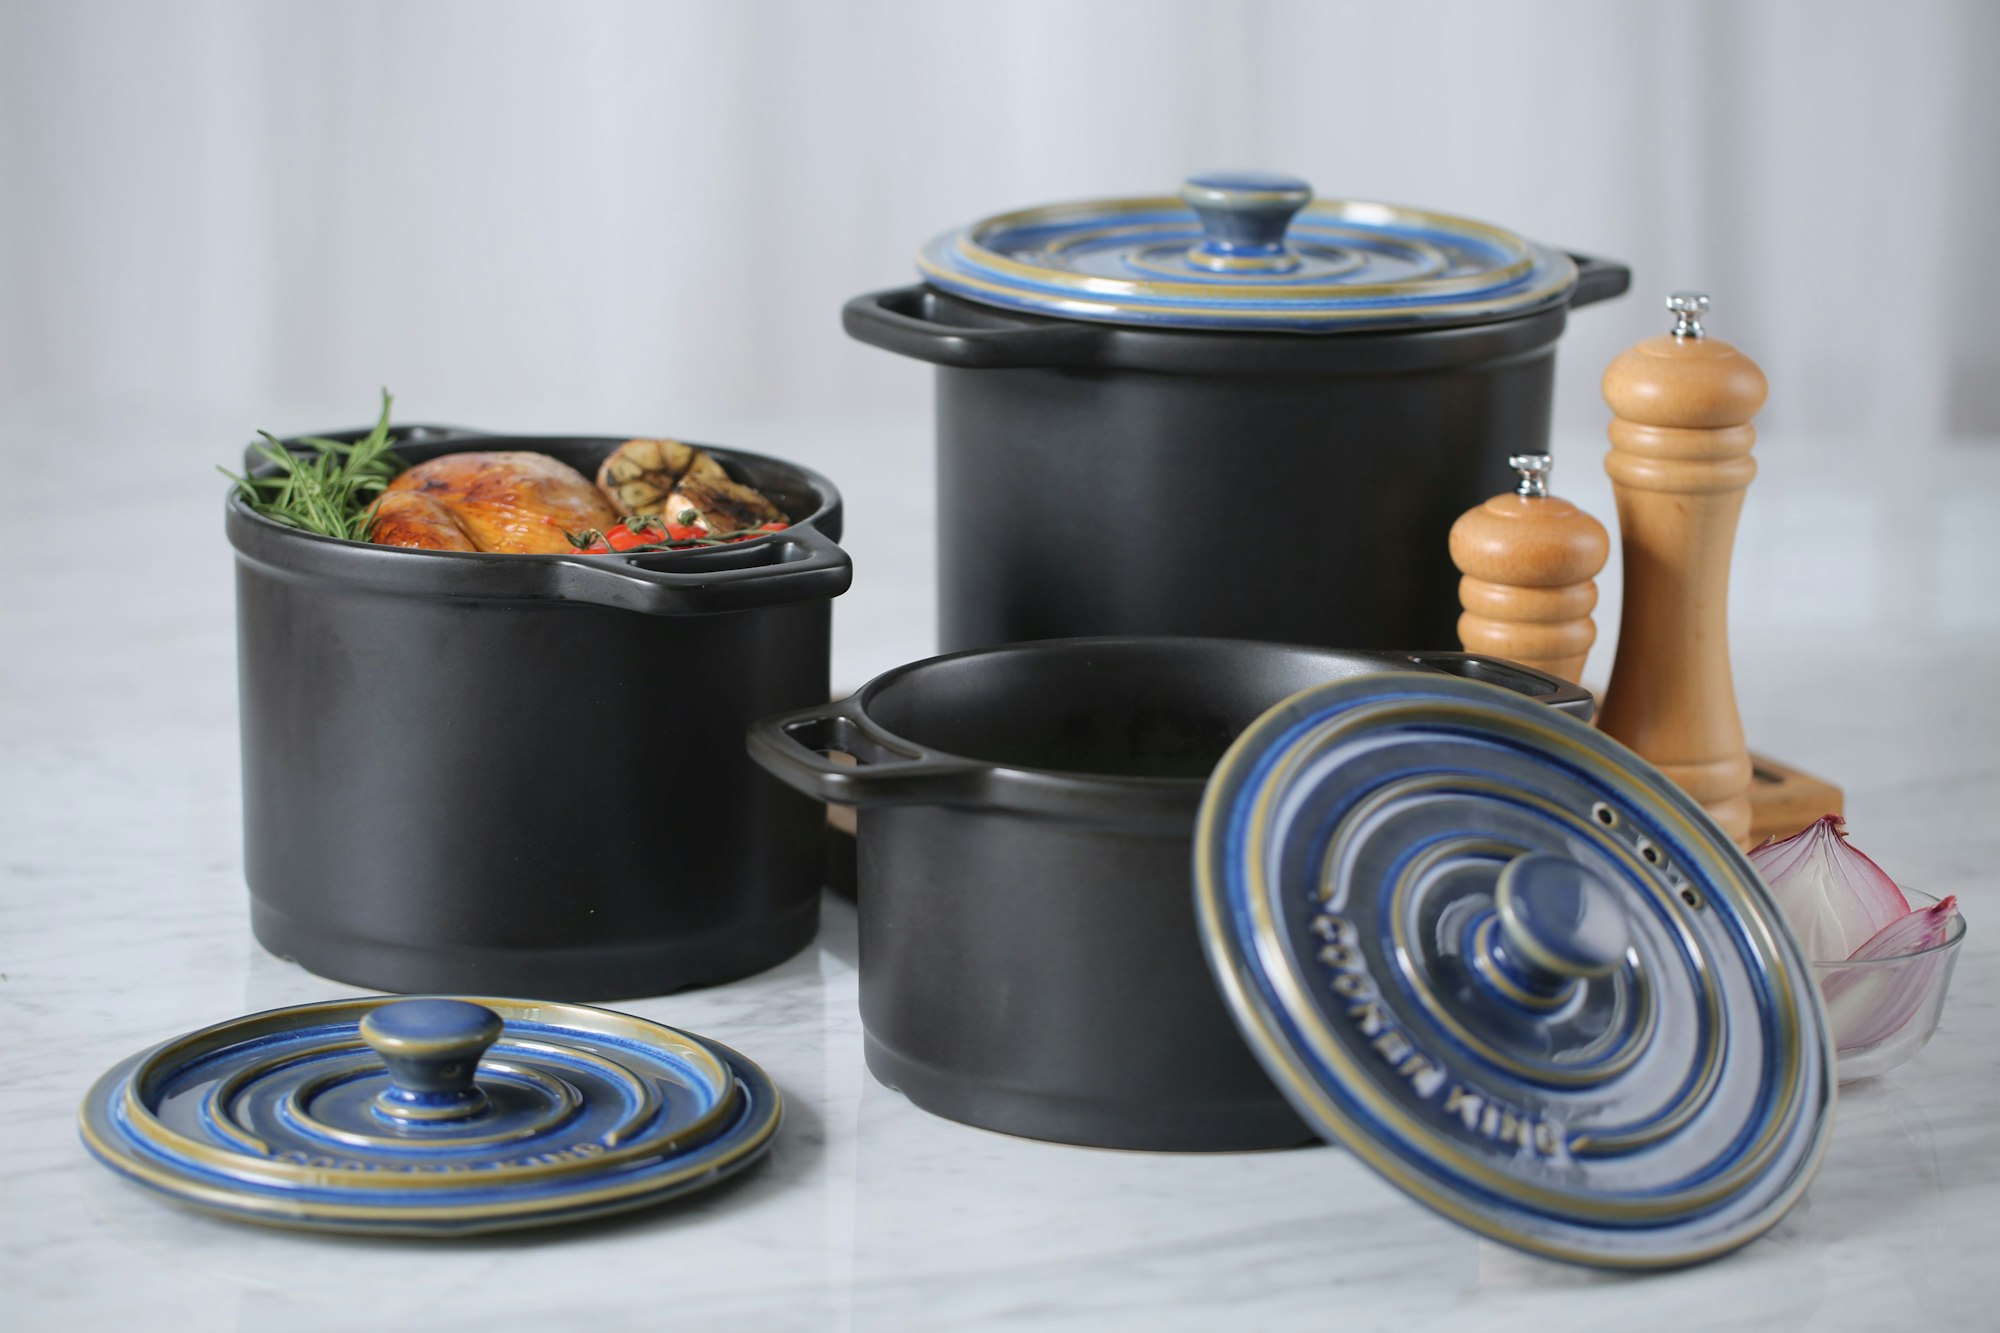 A set of pressure cookers